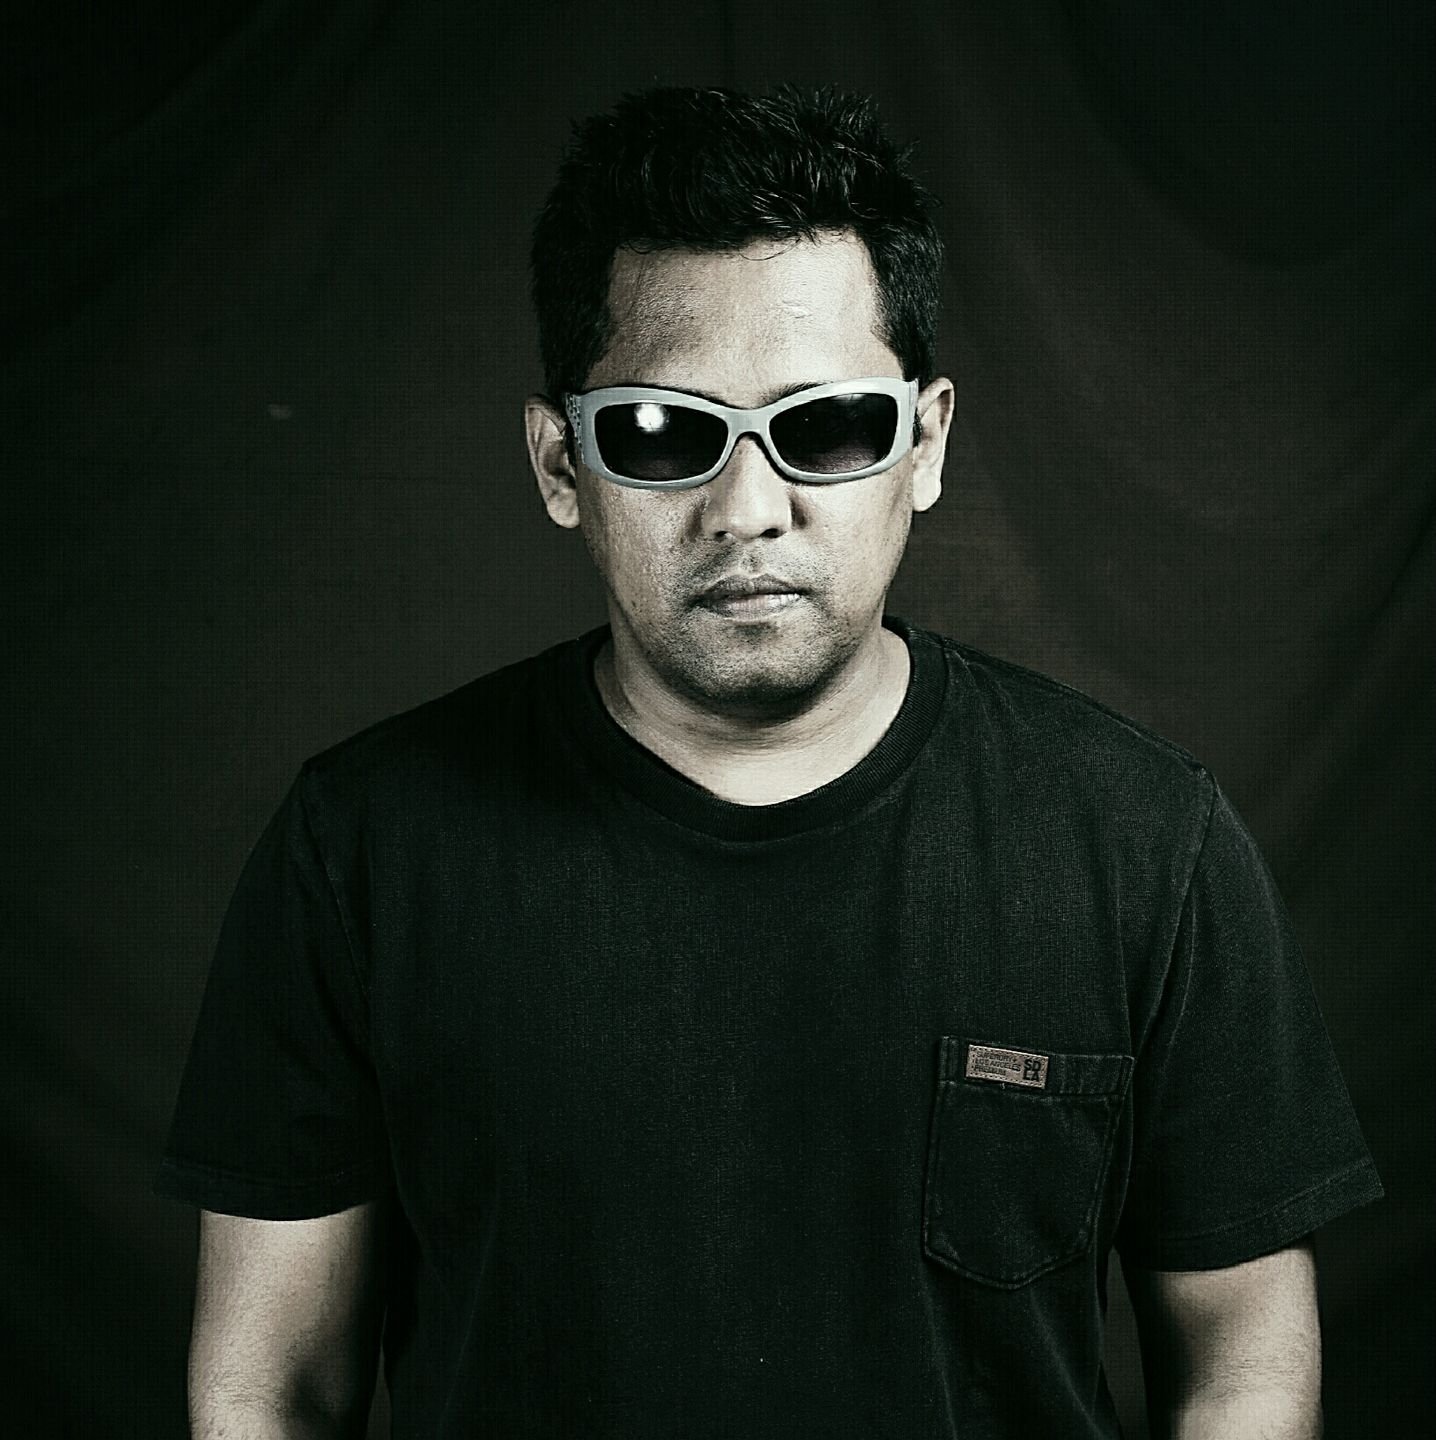 Indian DJ Psy Inertia publishes tracklist for show 4.